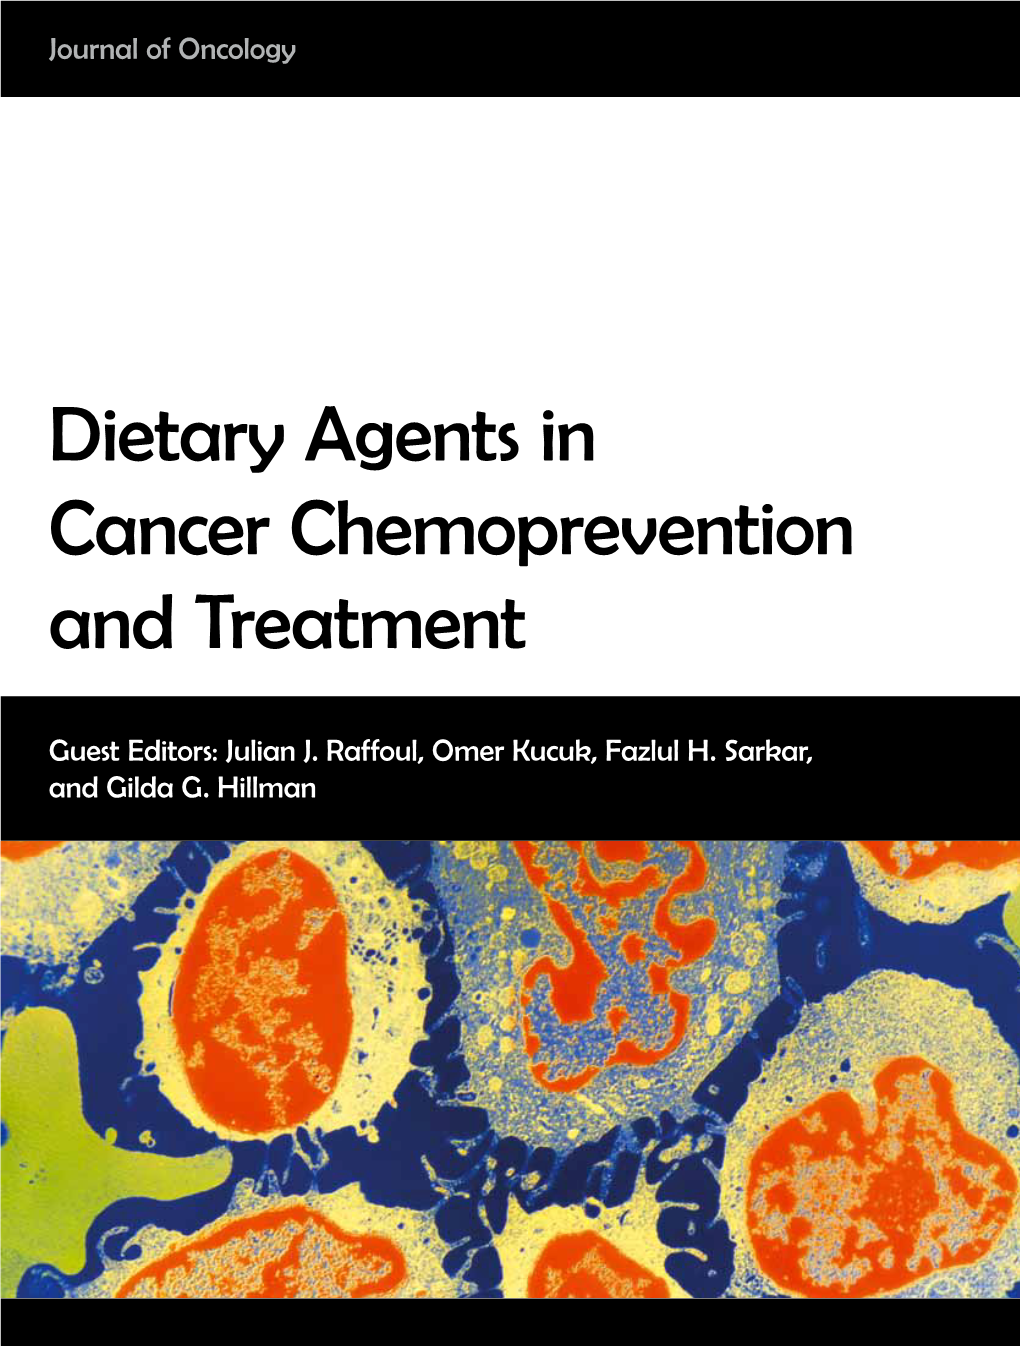 Dietary Agents in Cancer Chemoprevention and Treatment